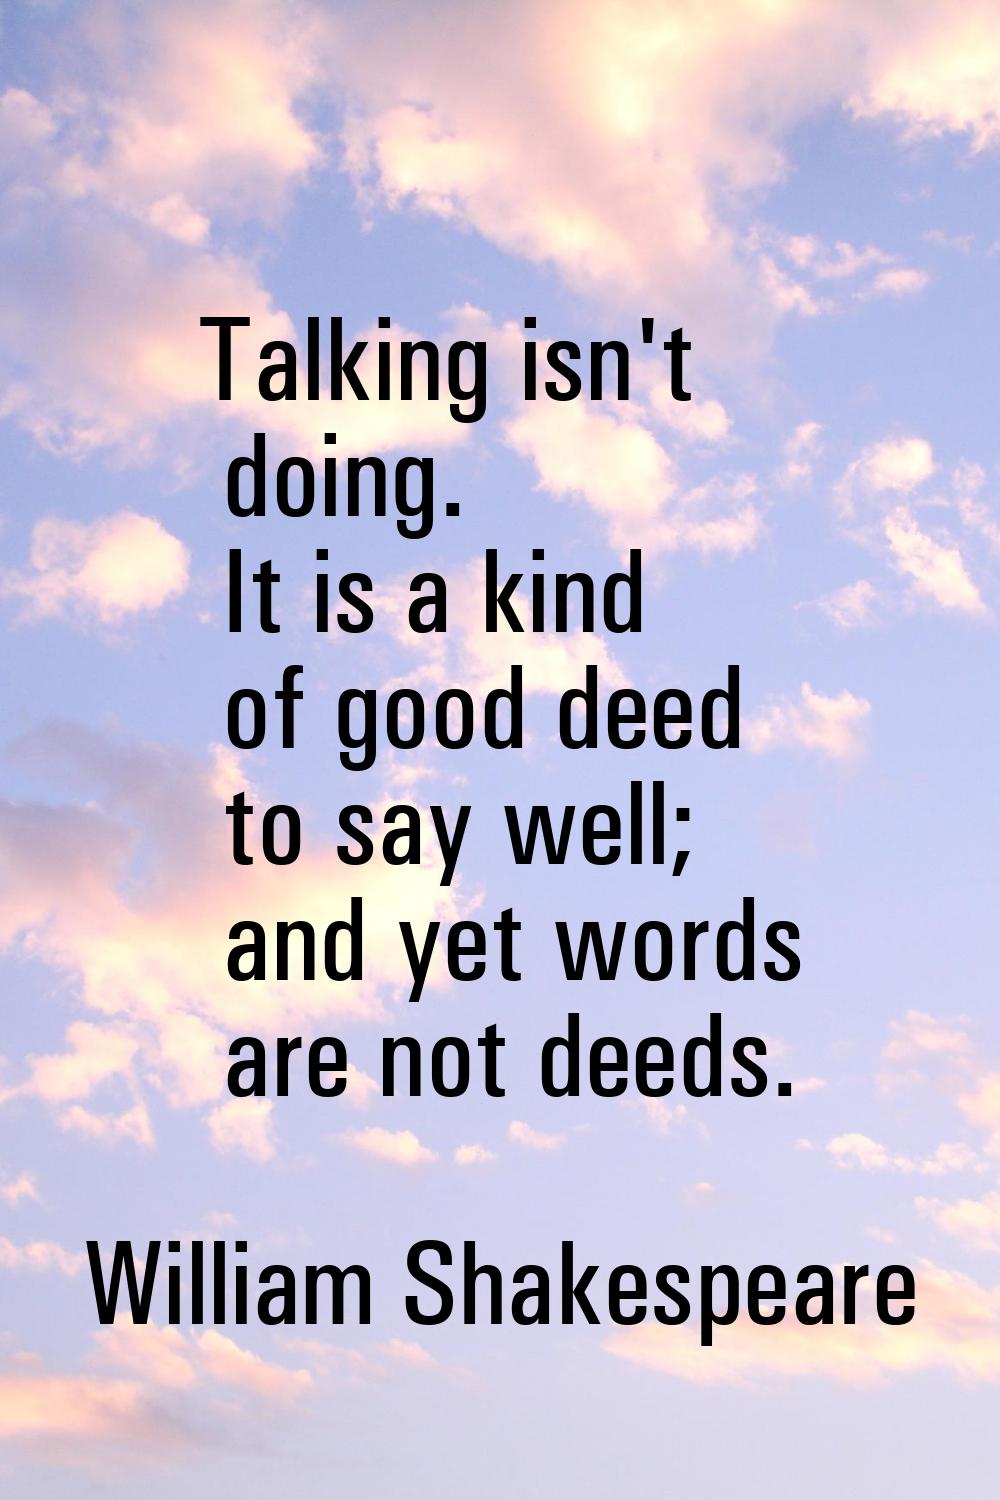 Talking isn't doing. It is a kind of good deed to say well; and yet words are not deeds.